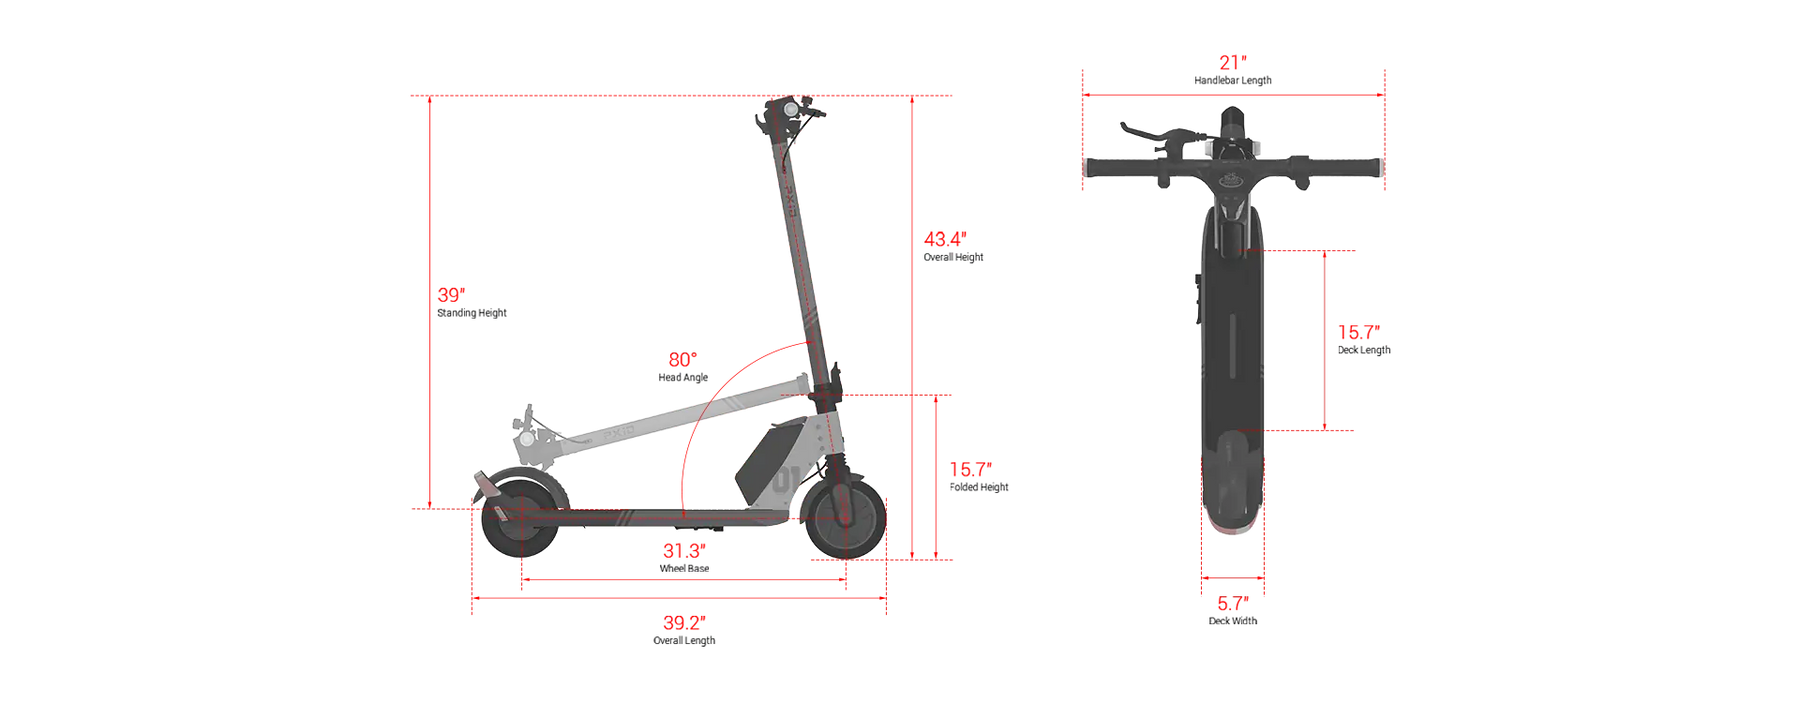 PXID-Size of P1 electric scooter